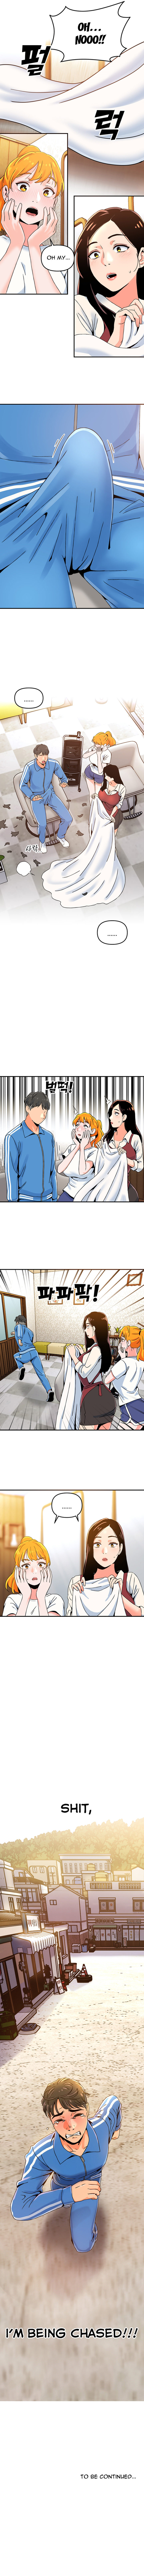 Beauty Salon Sisters - Chapter 1 Page 6